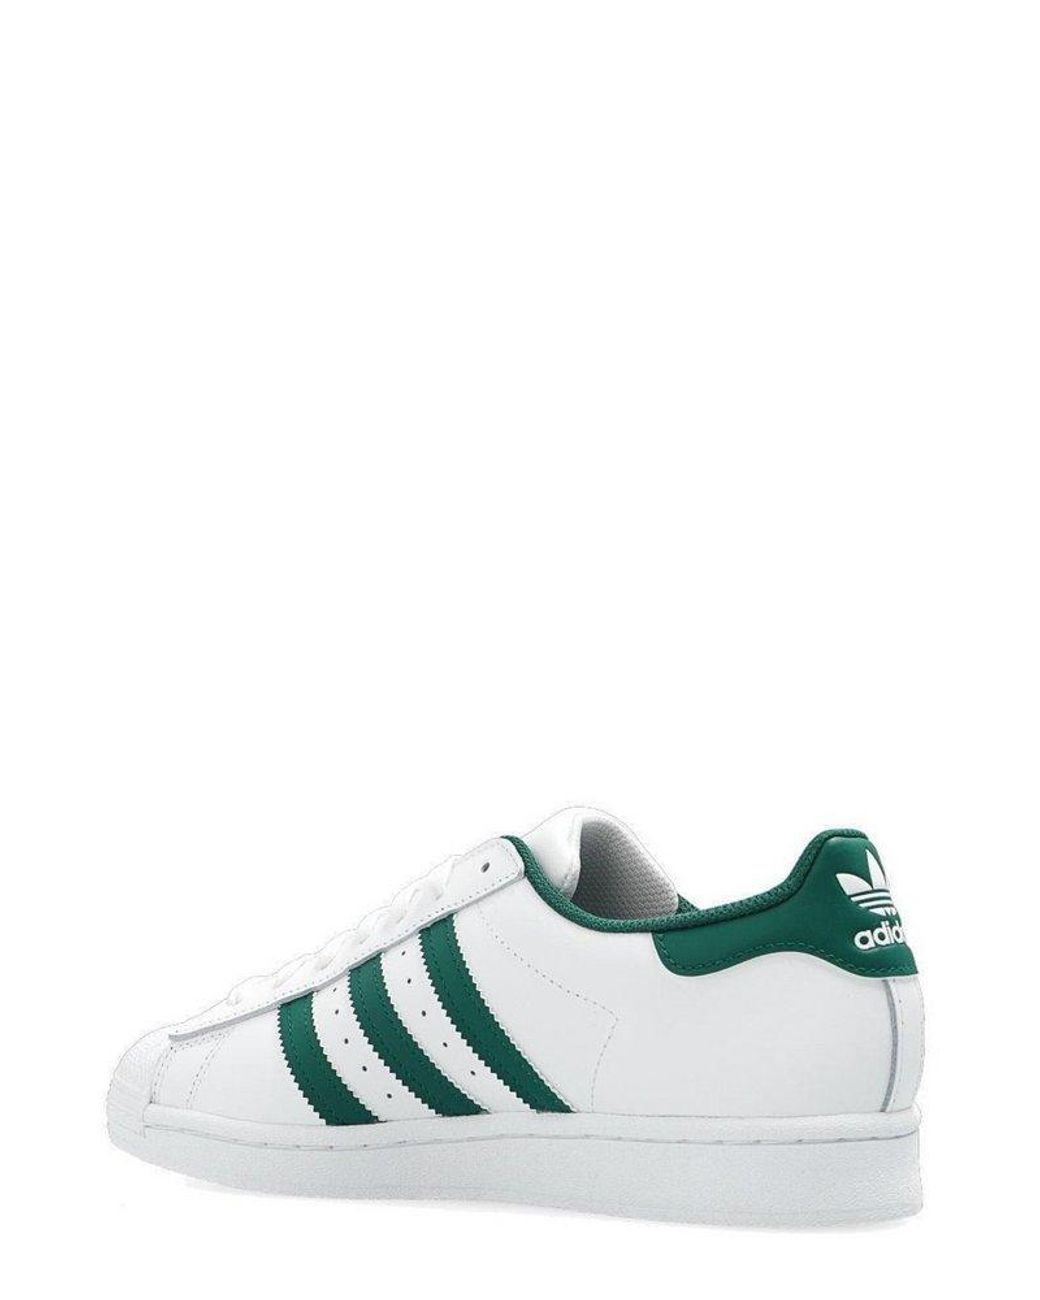 adidas Originals Superstar Lace-up Sneakers in Green | Lyst